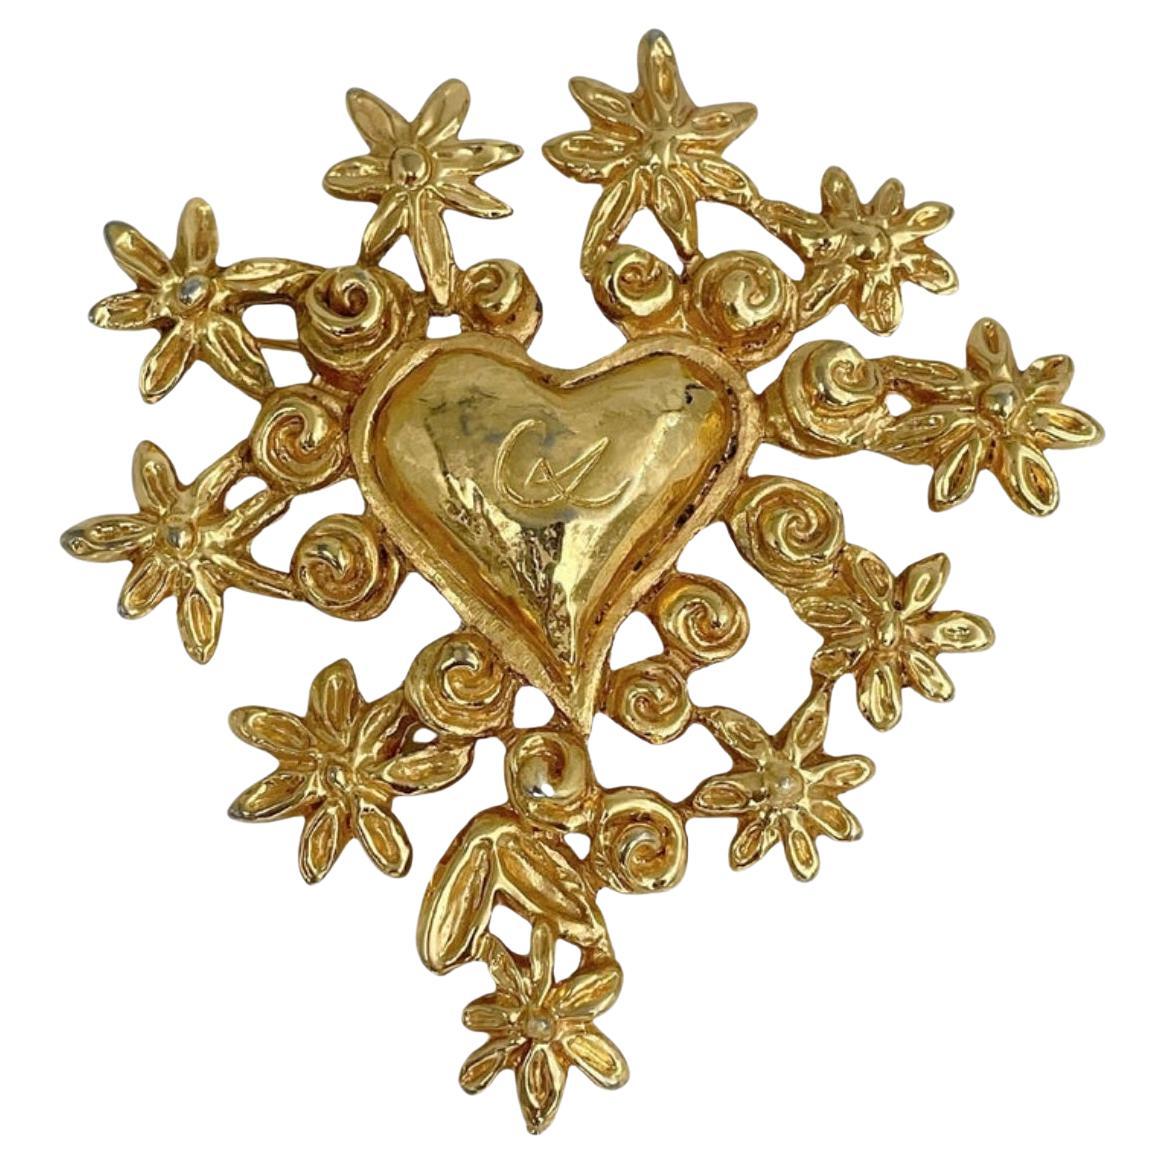 Rare CHRISTIAN LACROIX vintage brooch "Noel 93" heart-shaped with signature For Sale